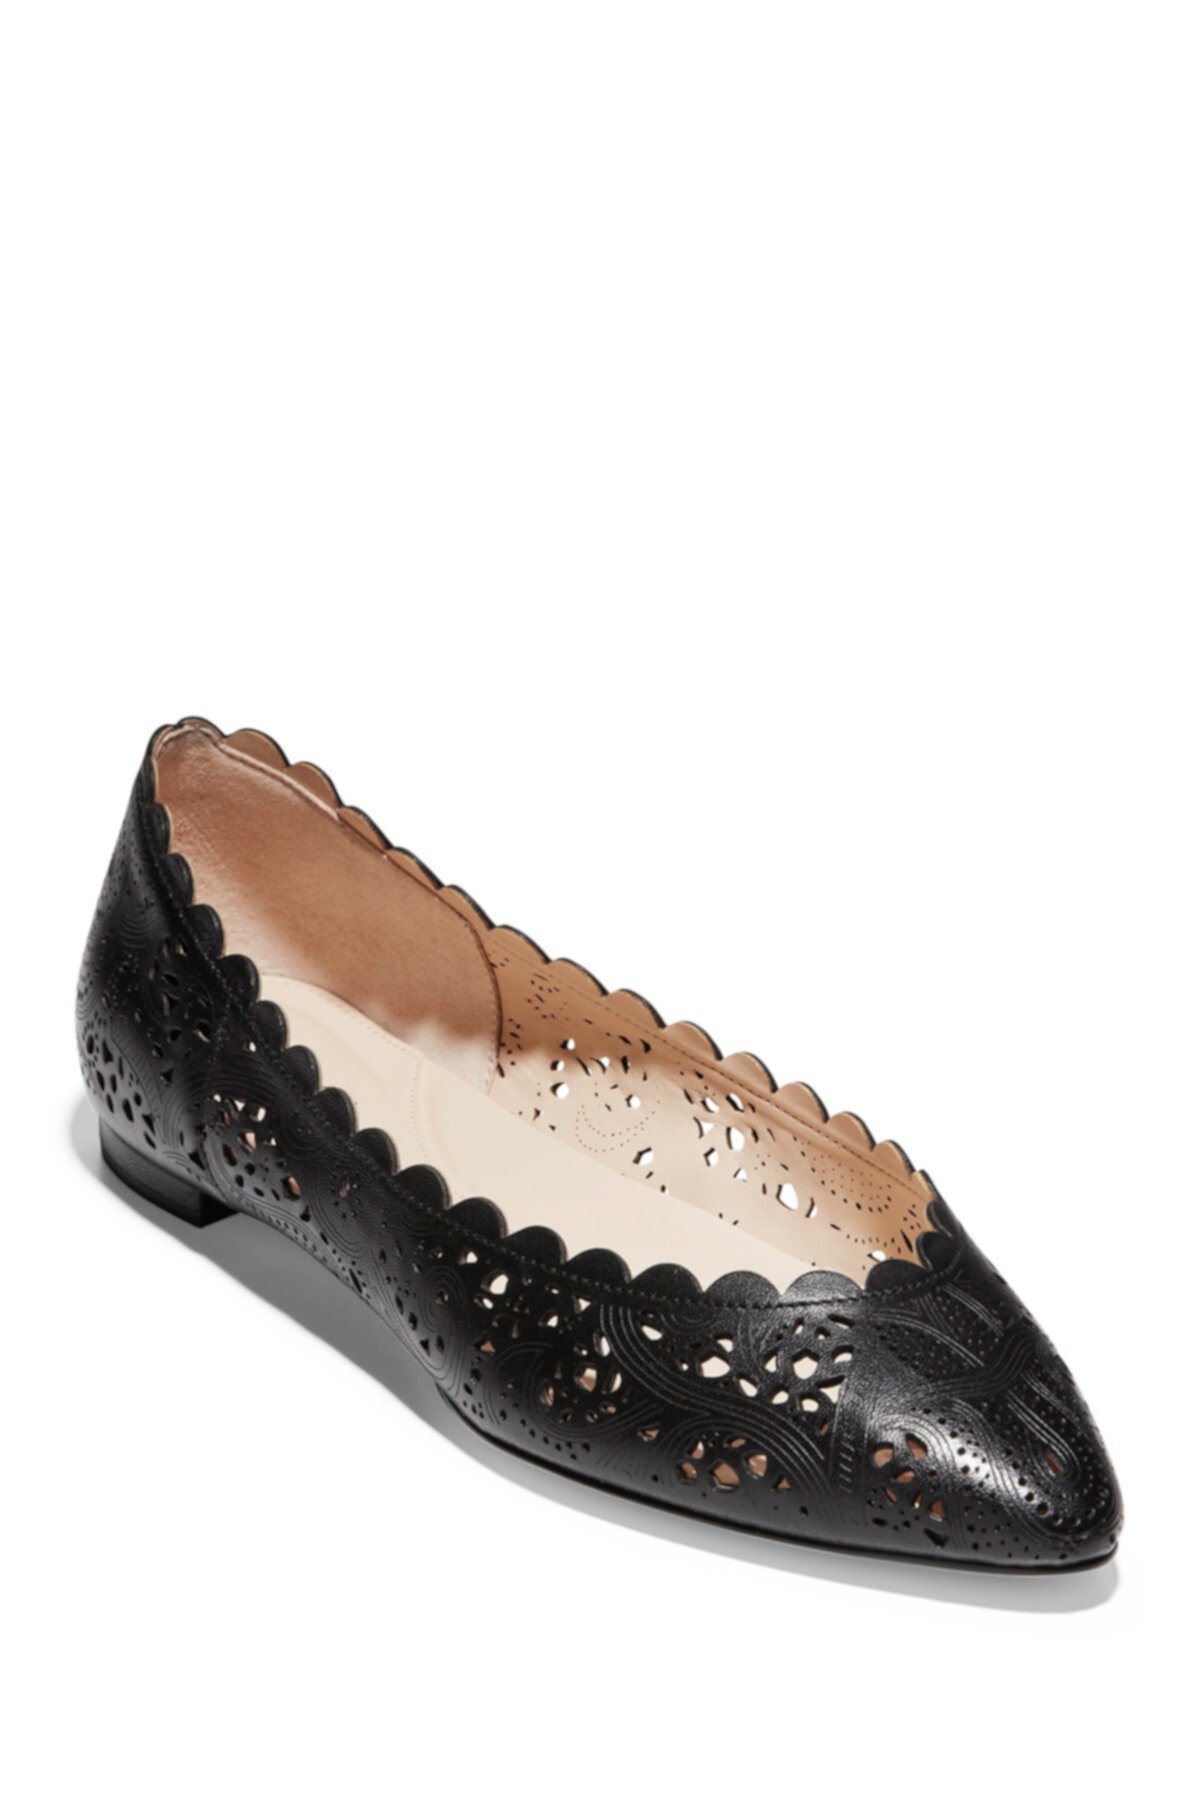 Grand Ambition Callie Flat Cole Haan